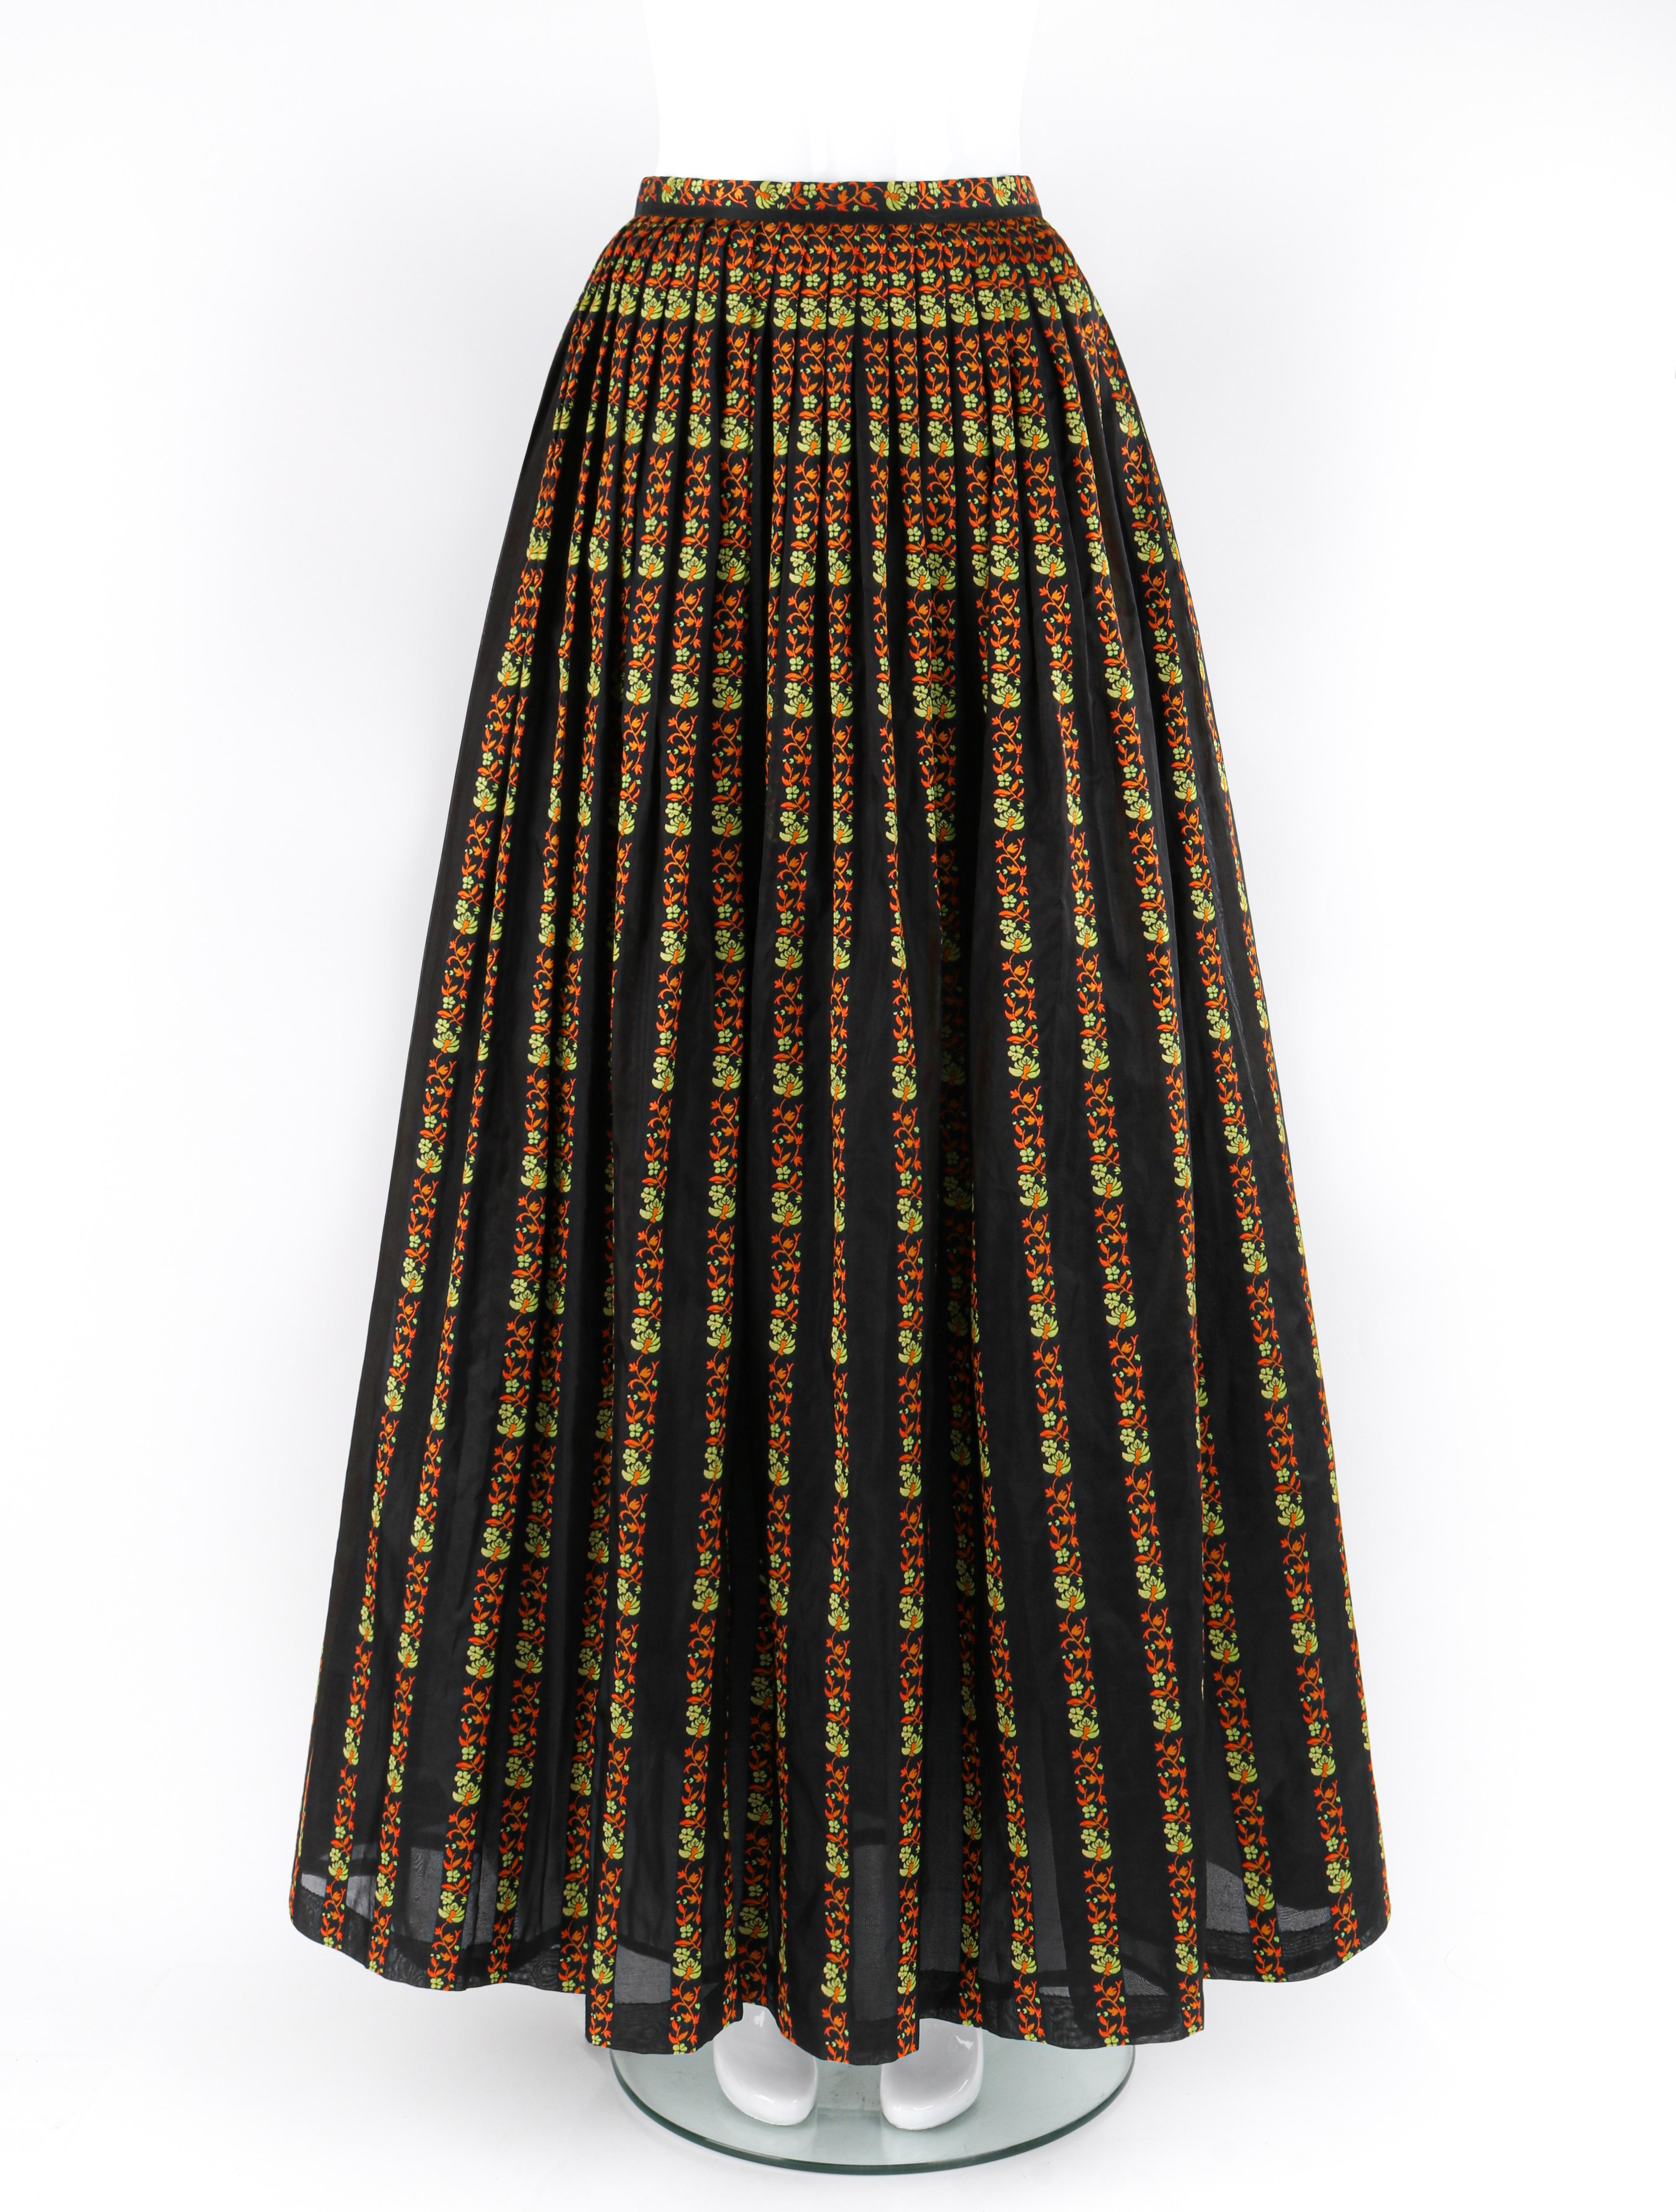 Brand / Manufacturer: Celine
Circa: 1970s
Designer: Celine Vipiana
Style: Maxi circle skirt
Color(s): Shades of black, orange, green
Lined: Yes
Marked Fabric Content: 